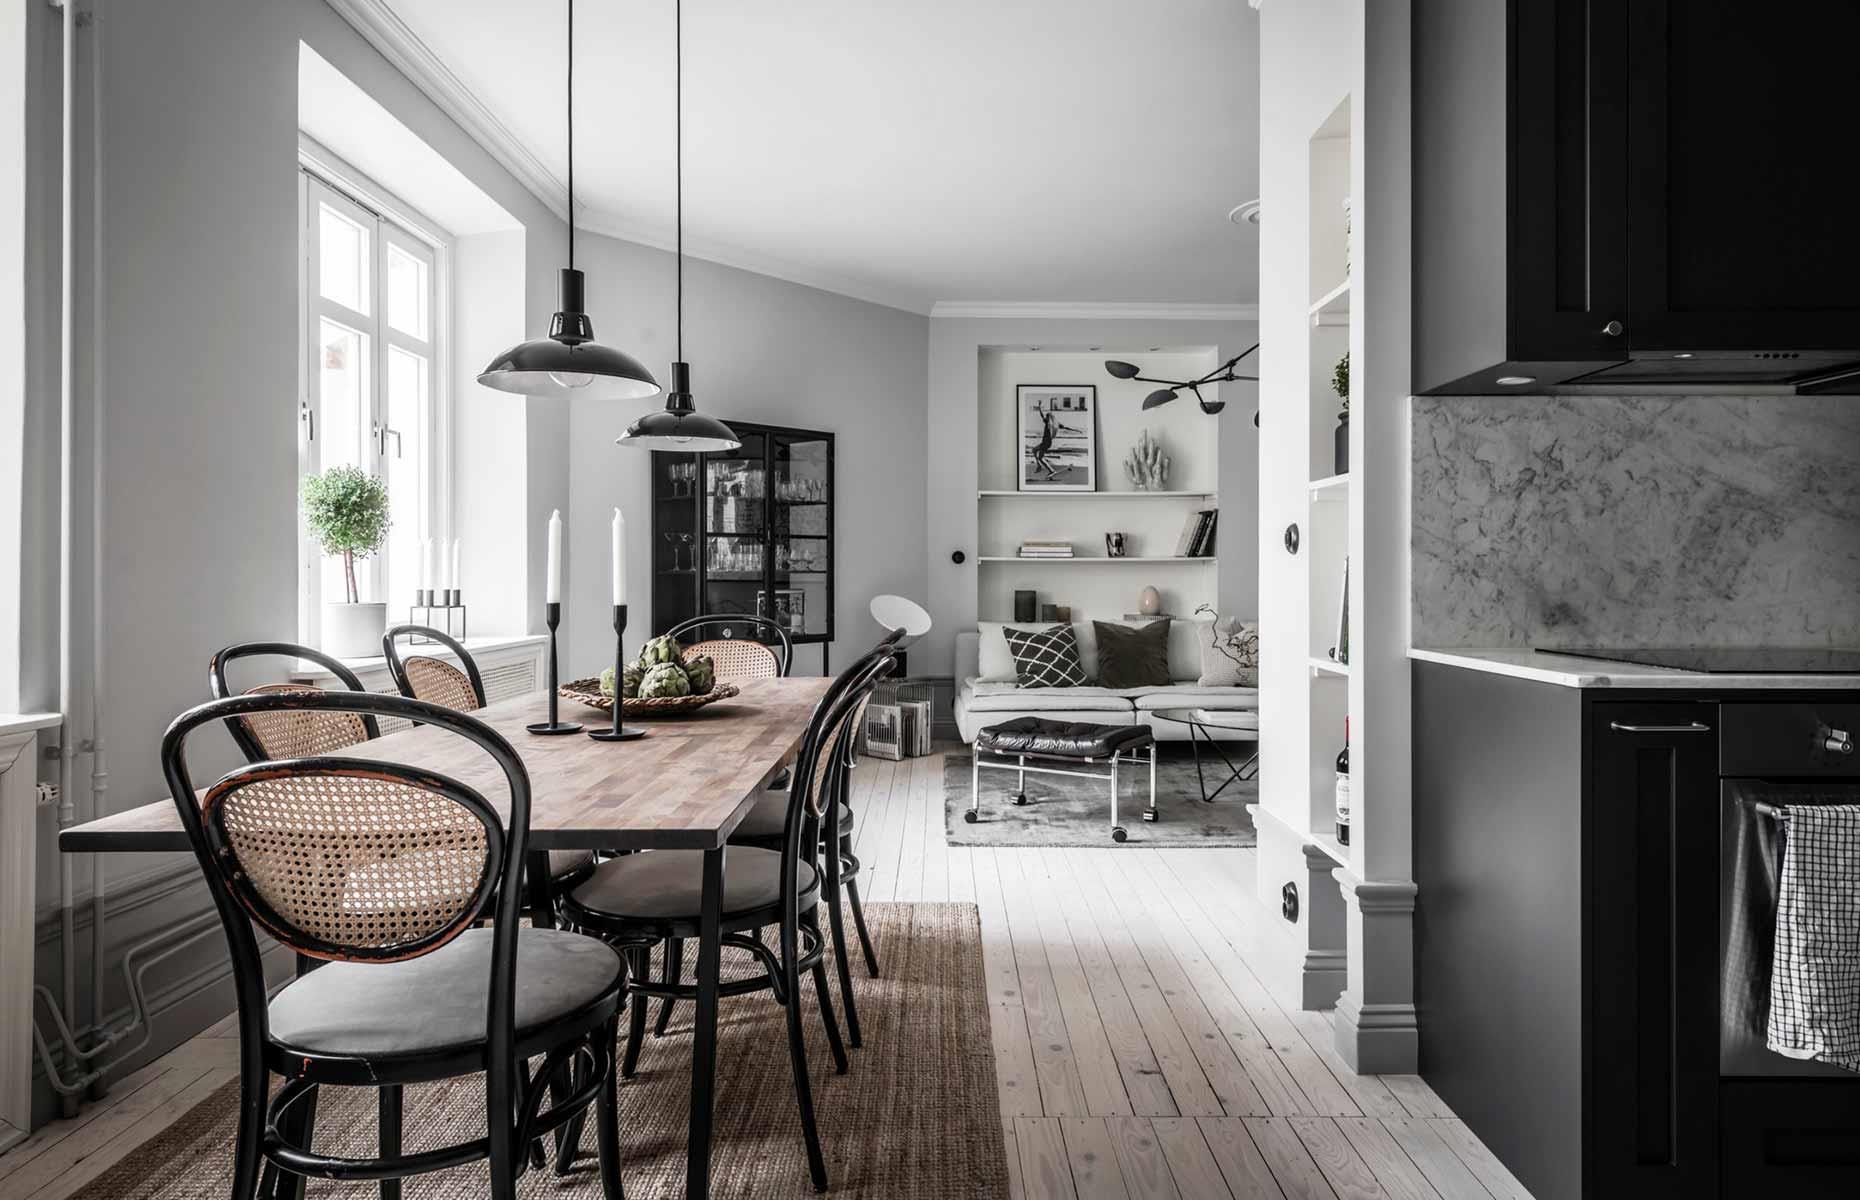 <p>Not every multifunctional living space is square or rectangular – instead of trying to make your room fit into a formulaic open-concept layout, embrace unusual dimensions and create a design that works with the eccentricities of your space. In the U-shaped floor plan of this Scandinavian loft for rent via <a href="https://www.alvhem.com/objekt/nordhemsgatan-45b-linnestaden/">Alvhem</a>, a long dining table fits snuggly in the thoroughfare between the kitchen zone and the lounge.</p>